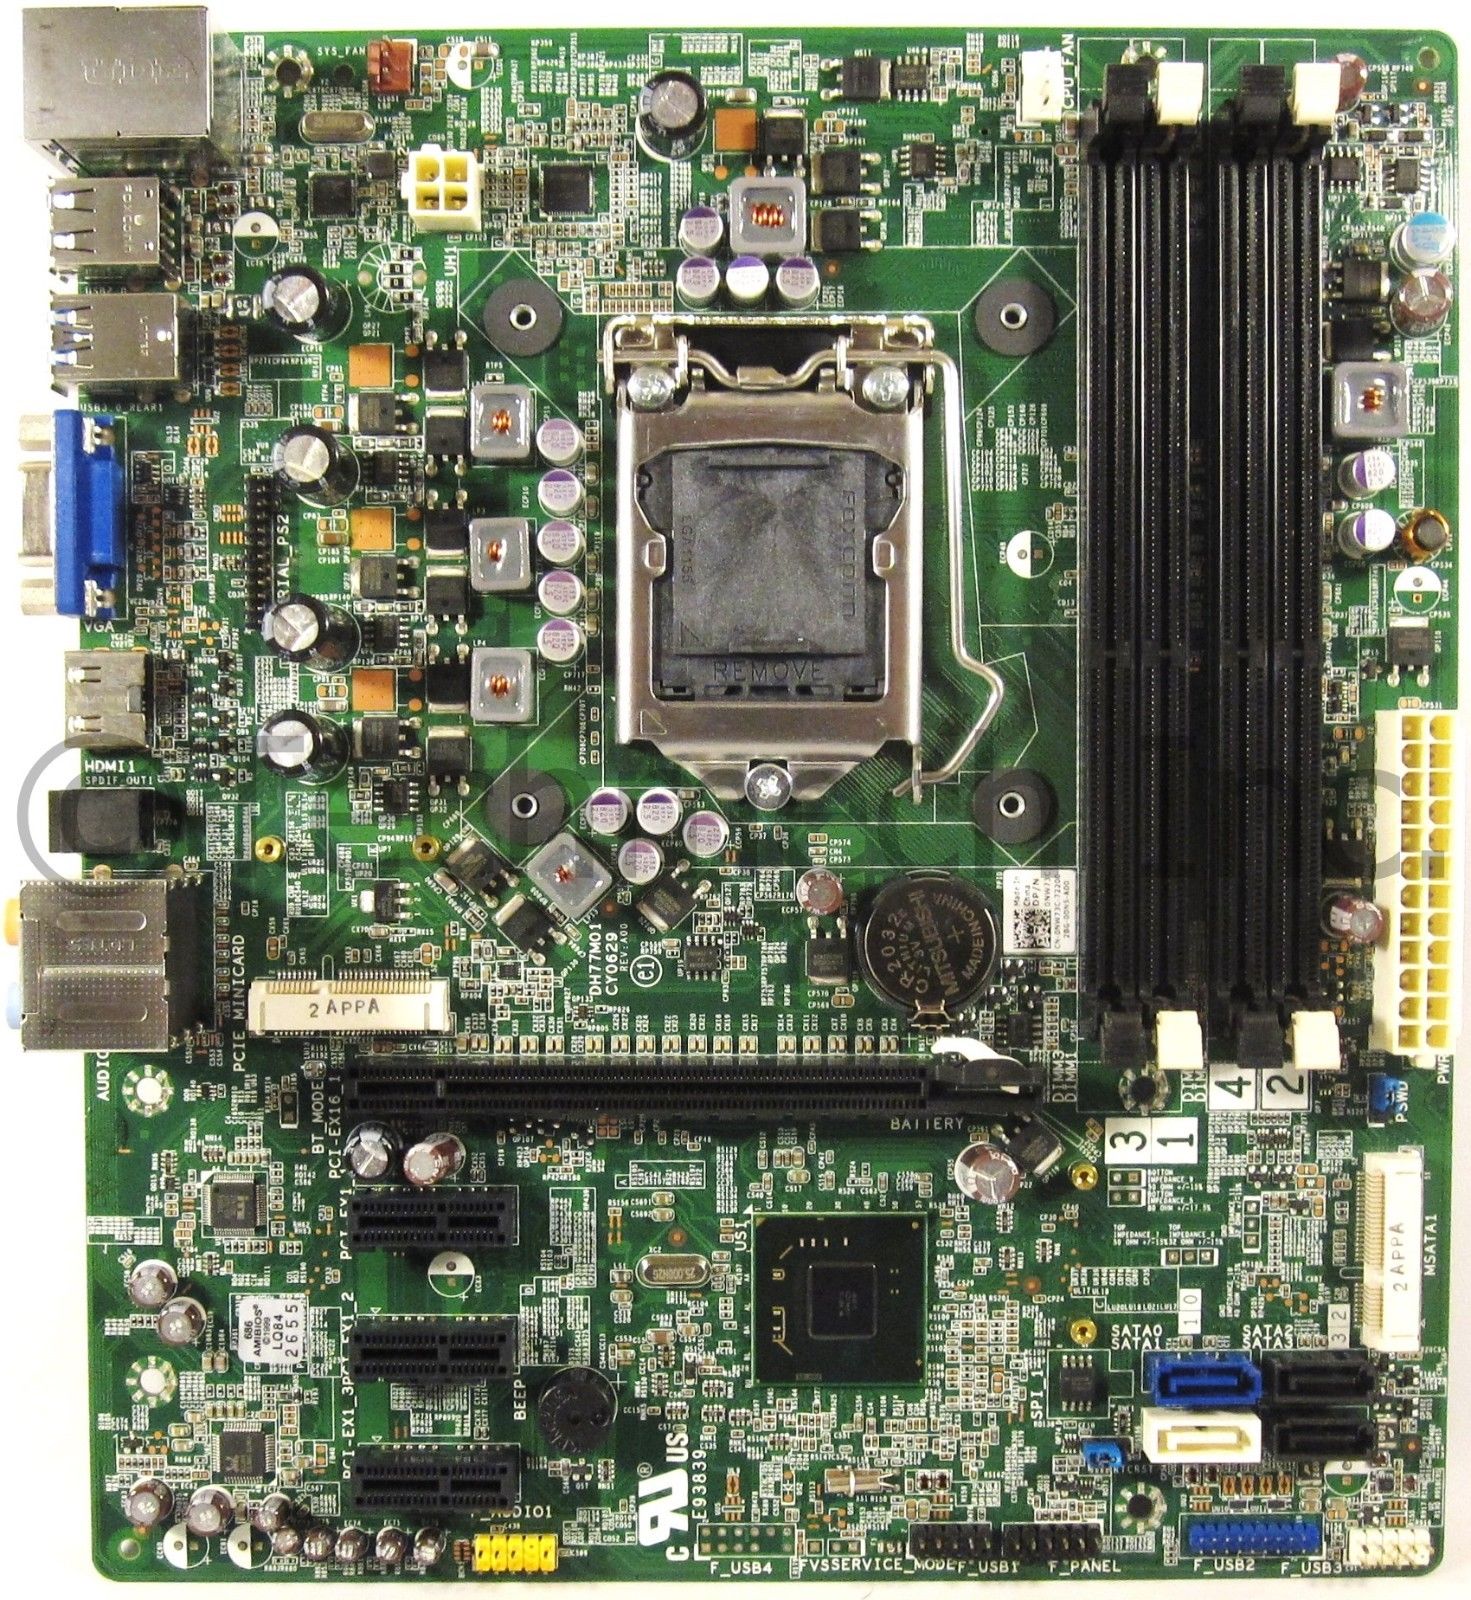 DELL Studio XPS 8500 Intel DH77M01 CY0629 Motherboard NW73C 0NW7